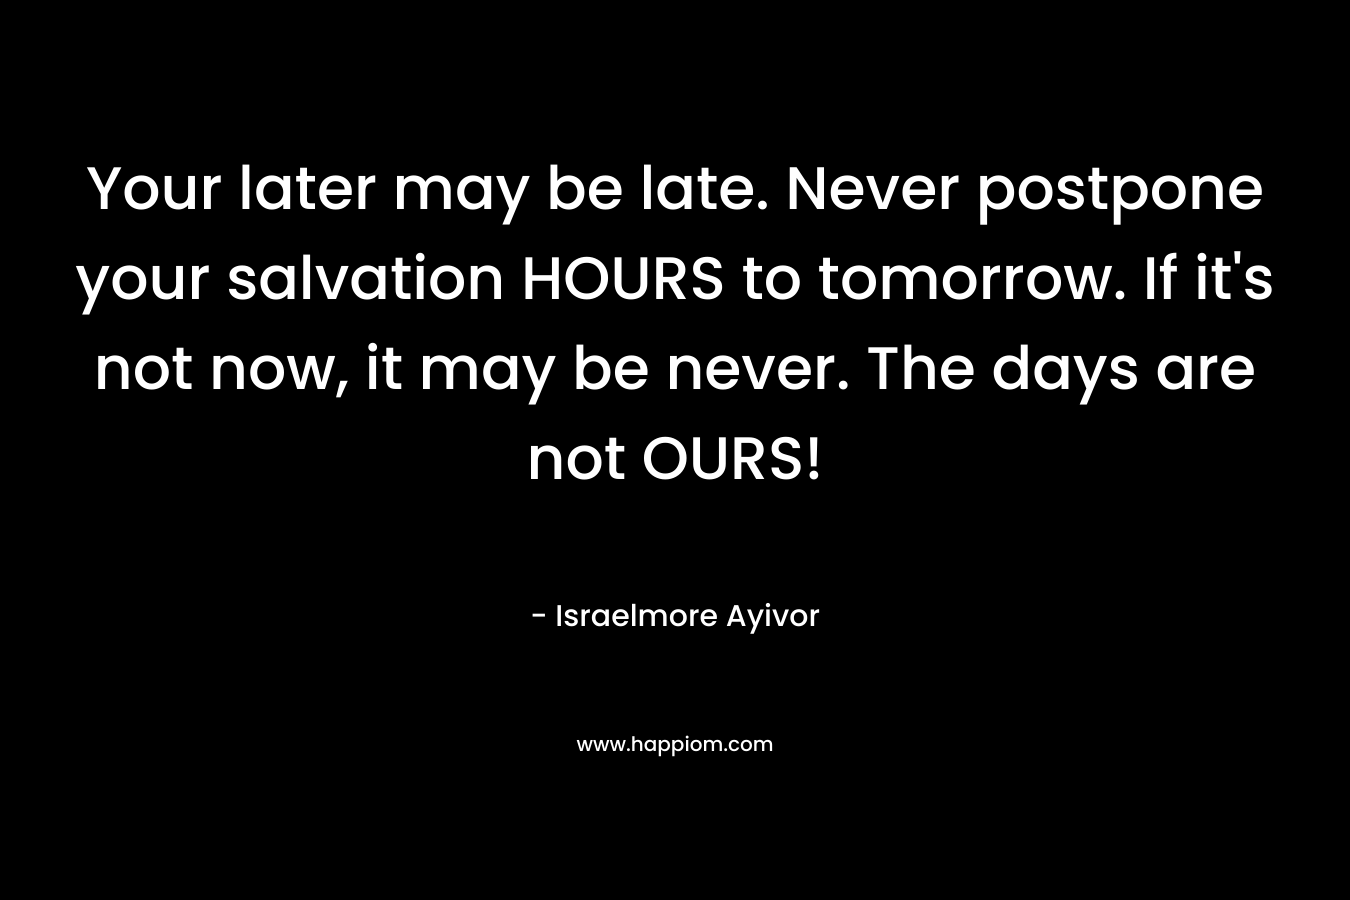 Your later may be late. Never postpone your salvation HOURS to tomorrow. If it’s not now, it may be never. The days are not OURS! – Israelmore Ayivor